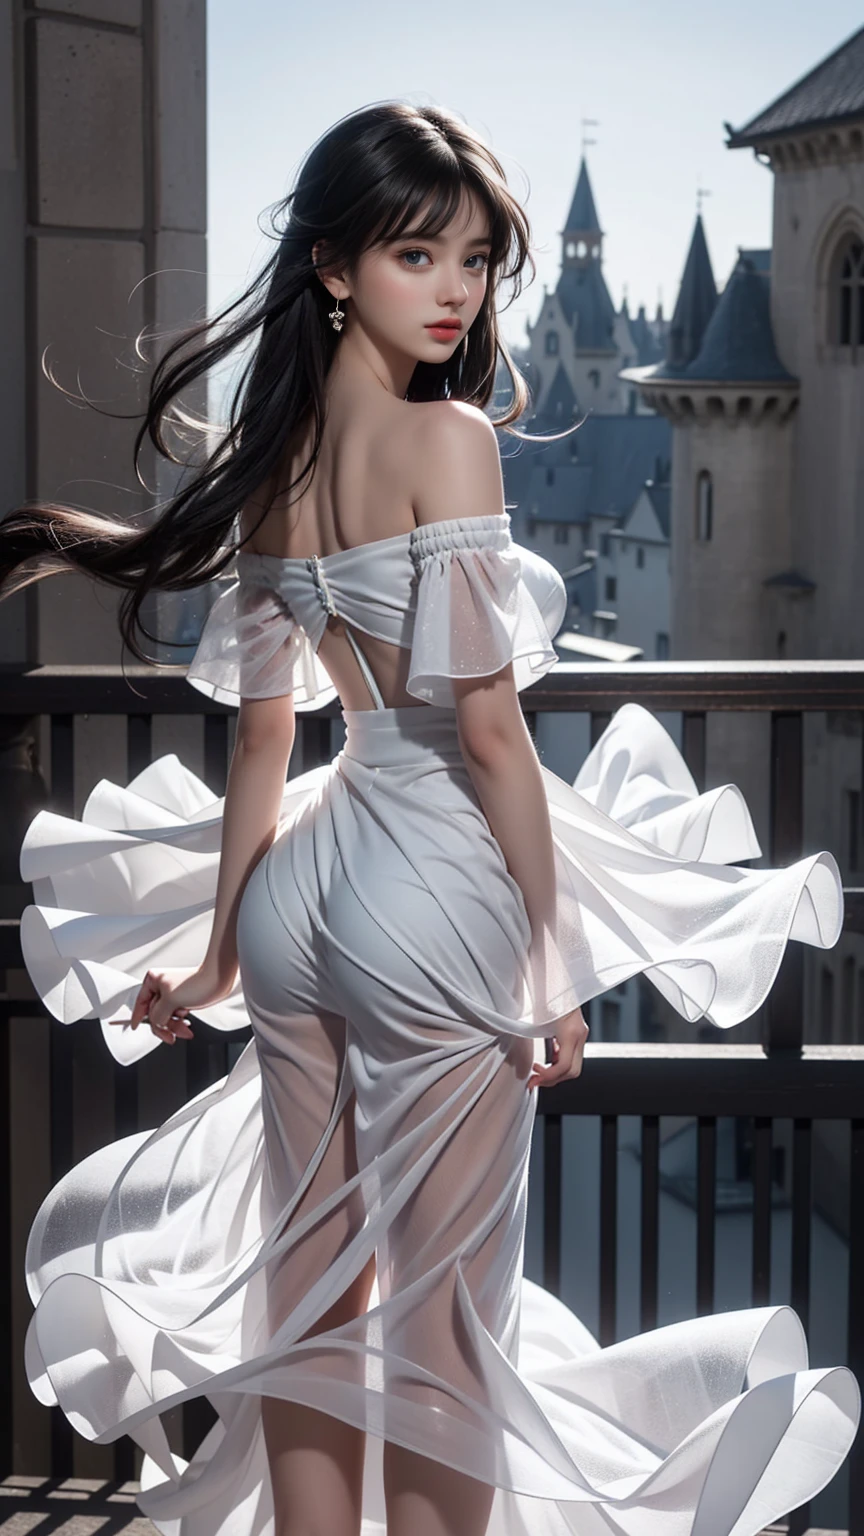 ((Girl standing on balcony of old castle))、((Rear view)),((look back))、Fluorescent color、1 girl、Looking to the side、Beautiful face、Beautiful eyes、（Off the shoulder：1.2）、Upper Body、Shiny Hair、Glowing Skin、 Reduce glare、The proportions of the fingers have been adjusted、Escrow、ass pov、Dynamic Angle、(((Master part)))、(((highest quality)))、(((Super-detailed))) detailed）、（An illustration）、（Detailed light）、（Very delicate and beautiful）、Dramatic_Shadow、Ray_Tracking、reflection、 Ultra-high resolution、((A girl with colorful hair and mesh in her black hair))、 Her hair flutters in the wind、(Large deep blue eyes)、Black Haired Woman、 Sparkling Butterfly、Black-haired woman、Points of light around the woman、Magical Aura、Green dot、Aura About Natural、超Magical AuraBlack-haired woman,((White off-the-shoulder semi-transparent white dress:1.3))、(No sleeve)、((My skirt is flying up in the wind)),((An old European castle is hazy in the distance)),((White panties are visible)),((One hand holds a wine glass)),